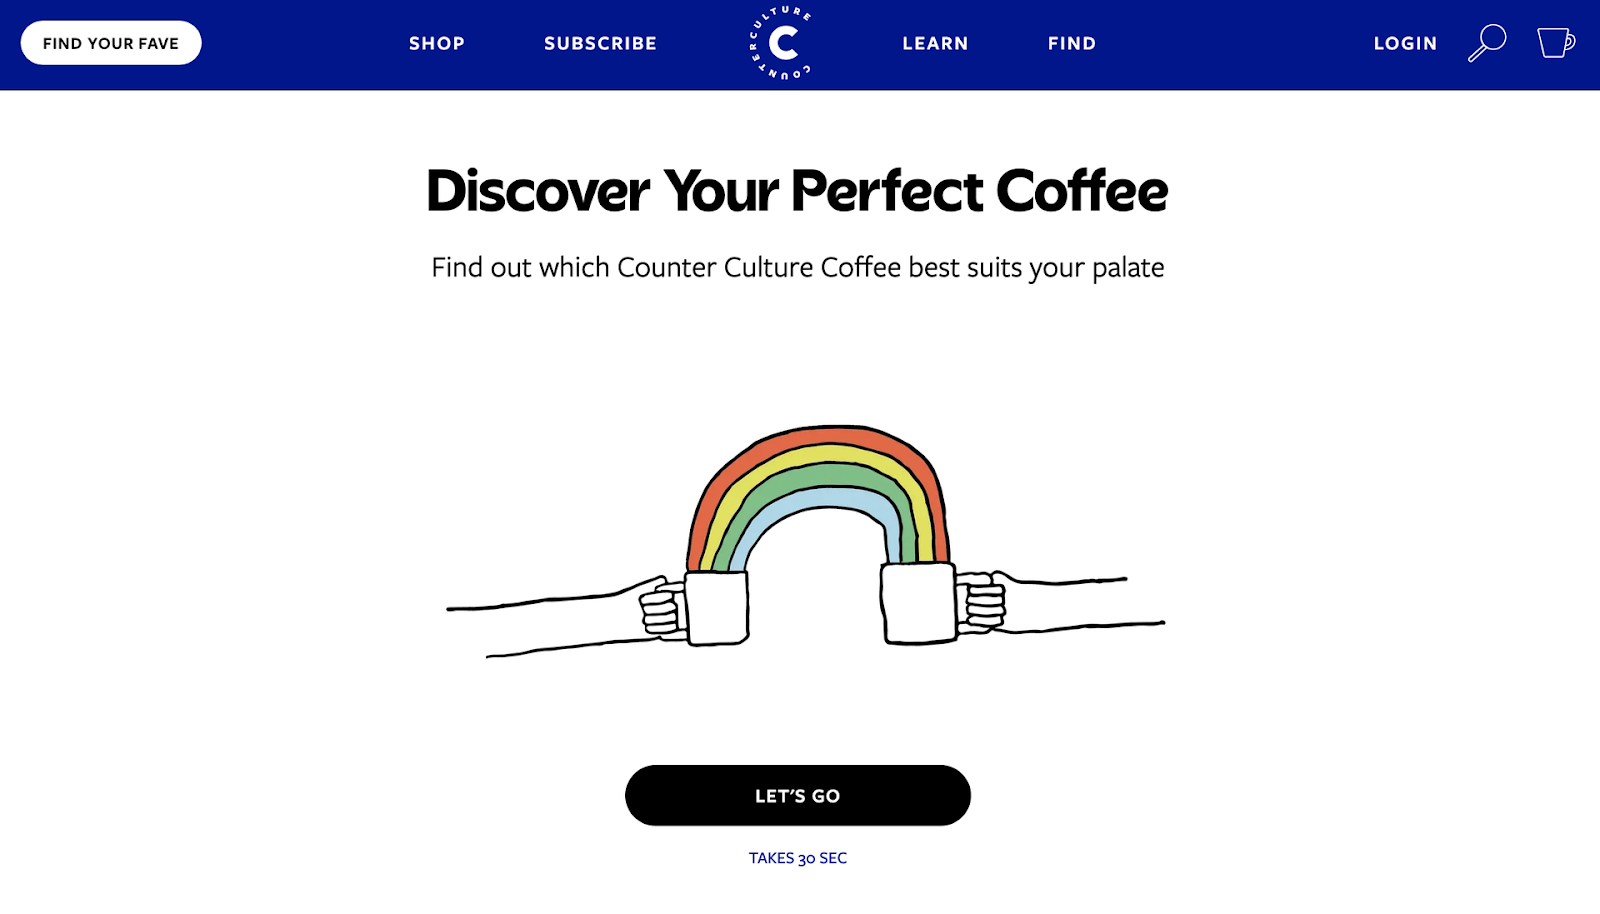 coffee brand offers personalized quiz